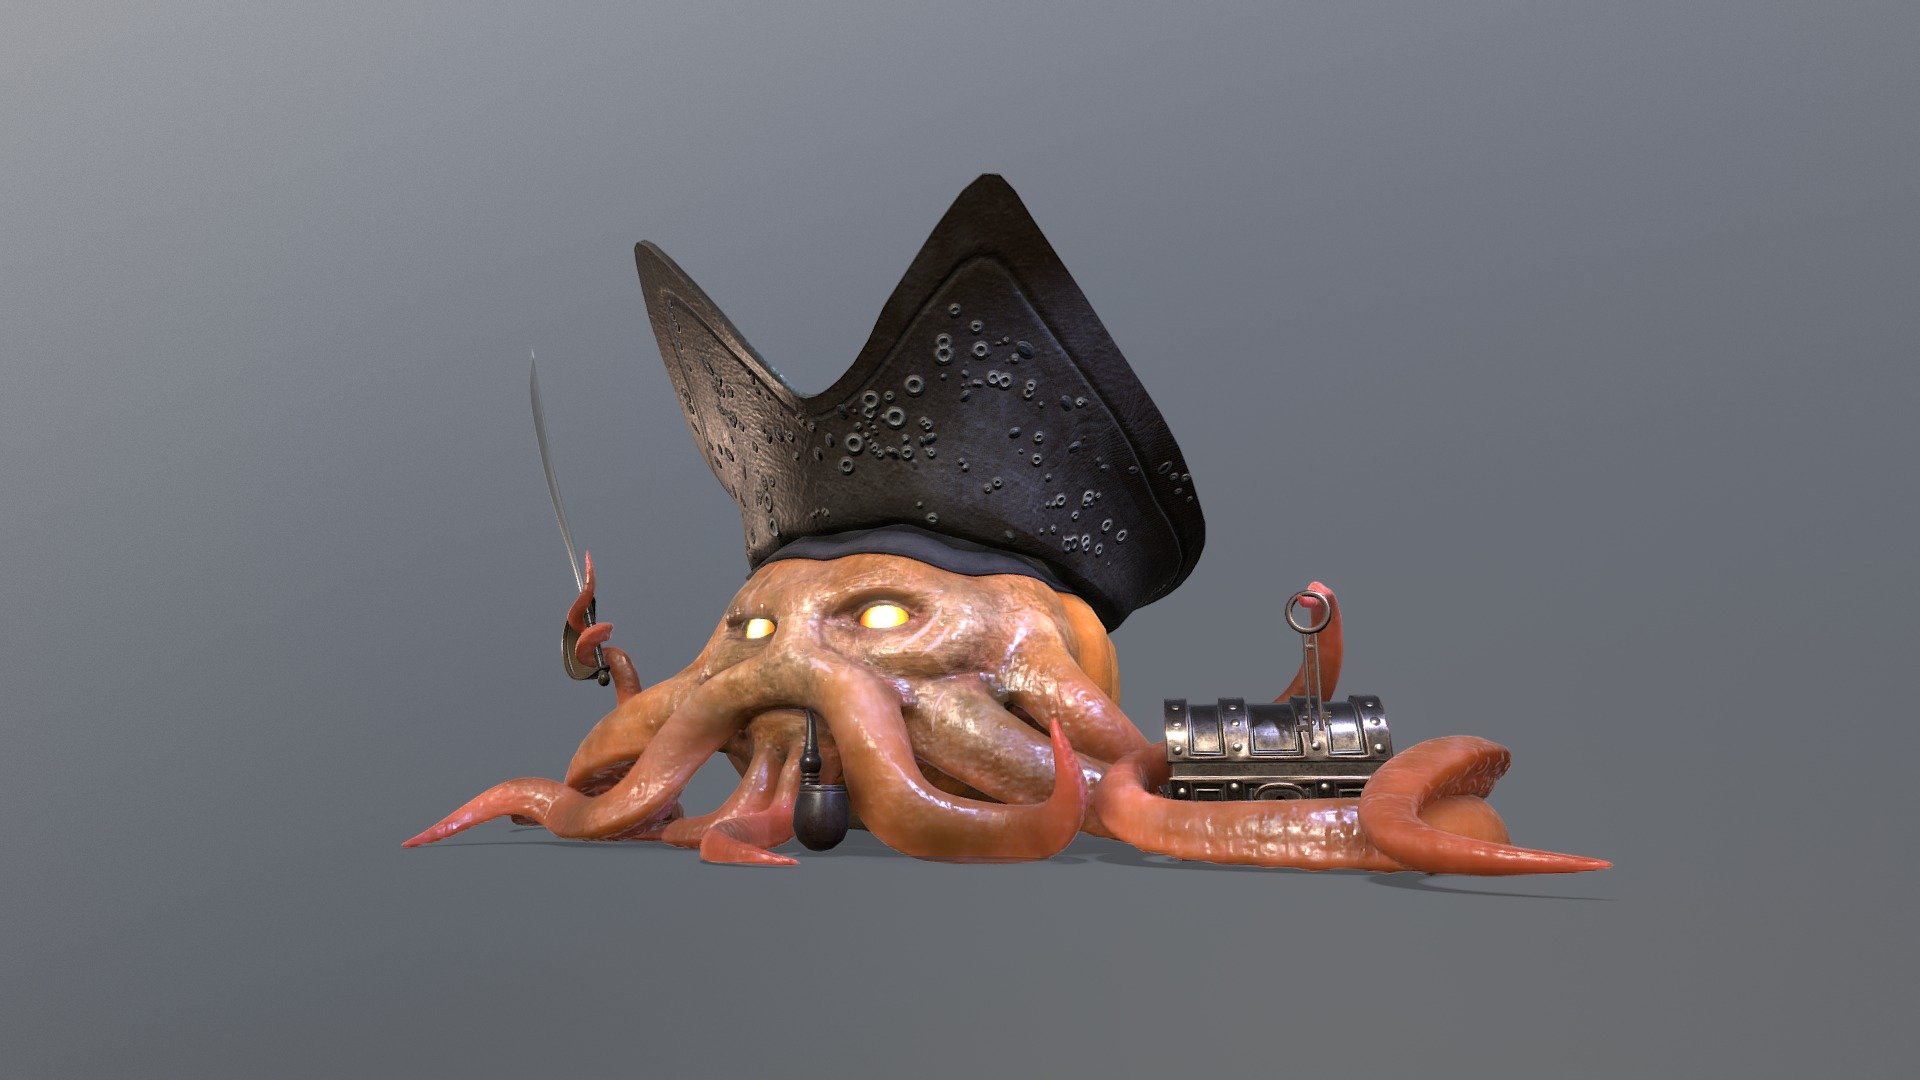 A model for sketchfab pupkin carving challenge. its sending to the Davy Jones from &ldquo;pirates of the caribbean dead man's chest